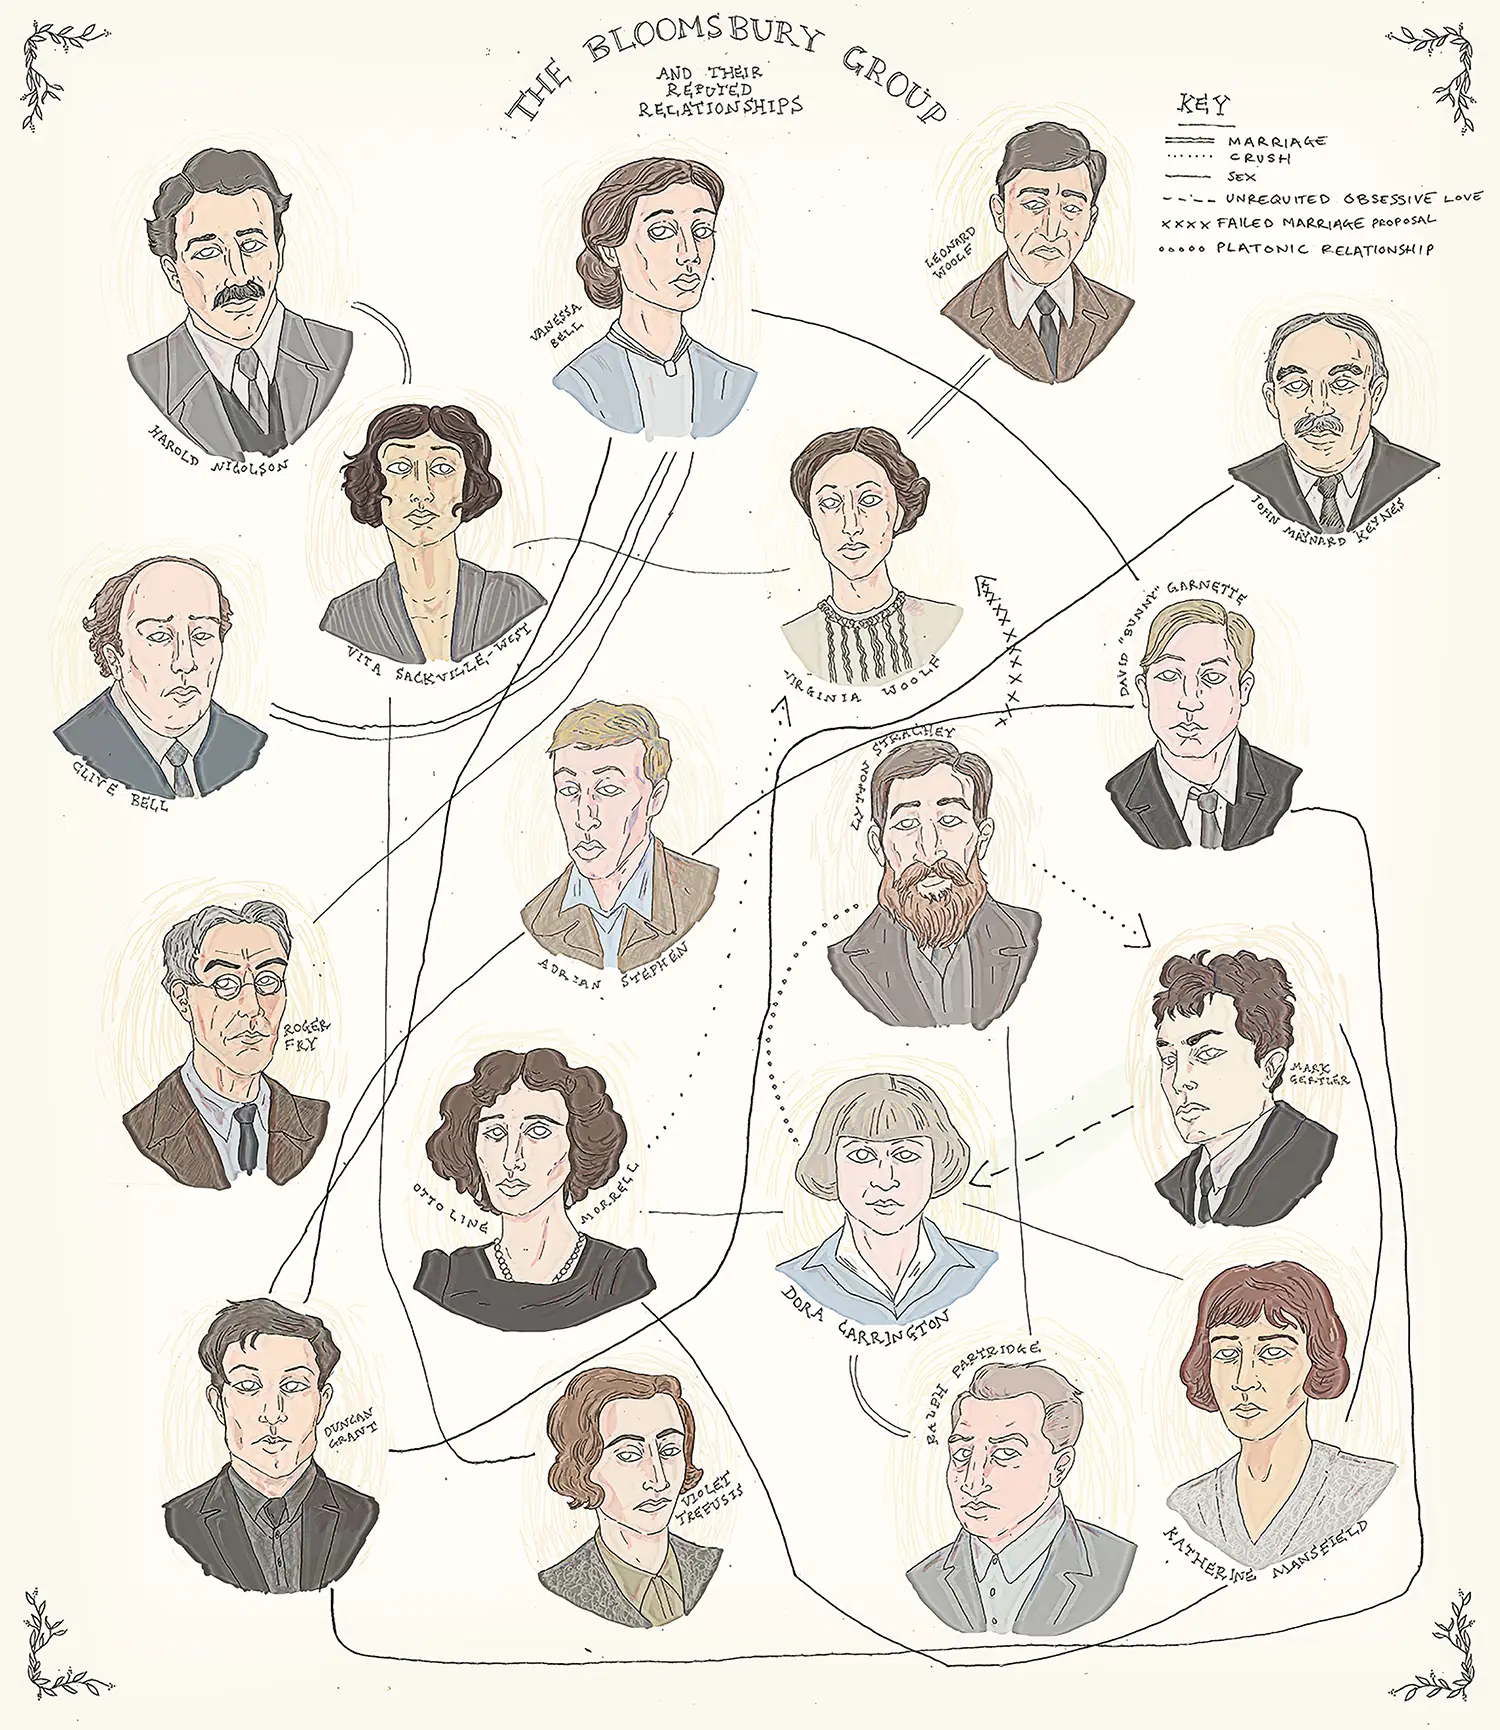 A diagram showing the entangled relationships between members of the Bloomsbury group, including marriages, crush, sex, unrequited obsessive love, failed marriage proposal, and platonic relationship.